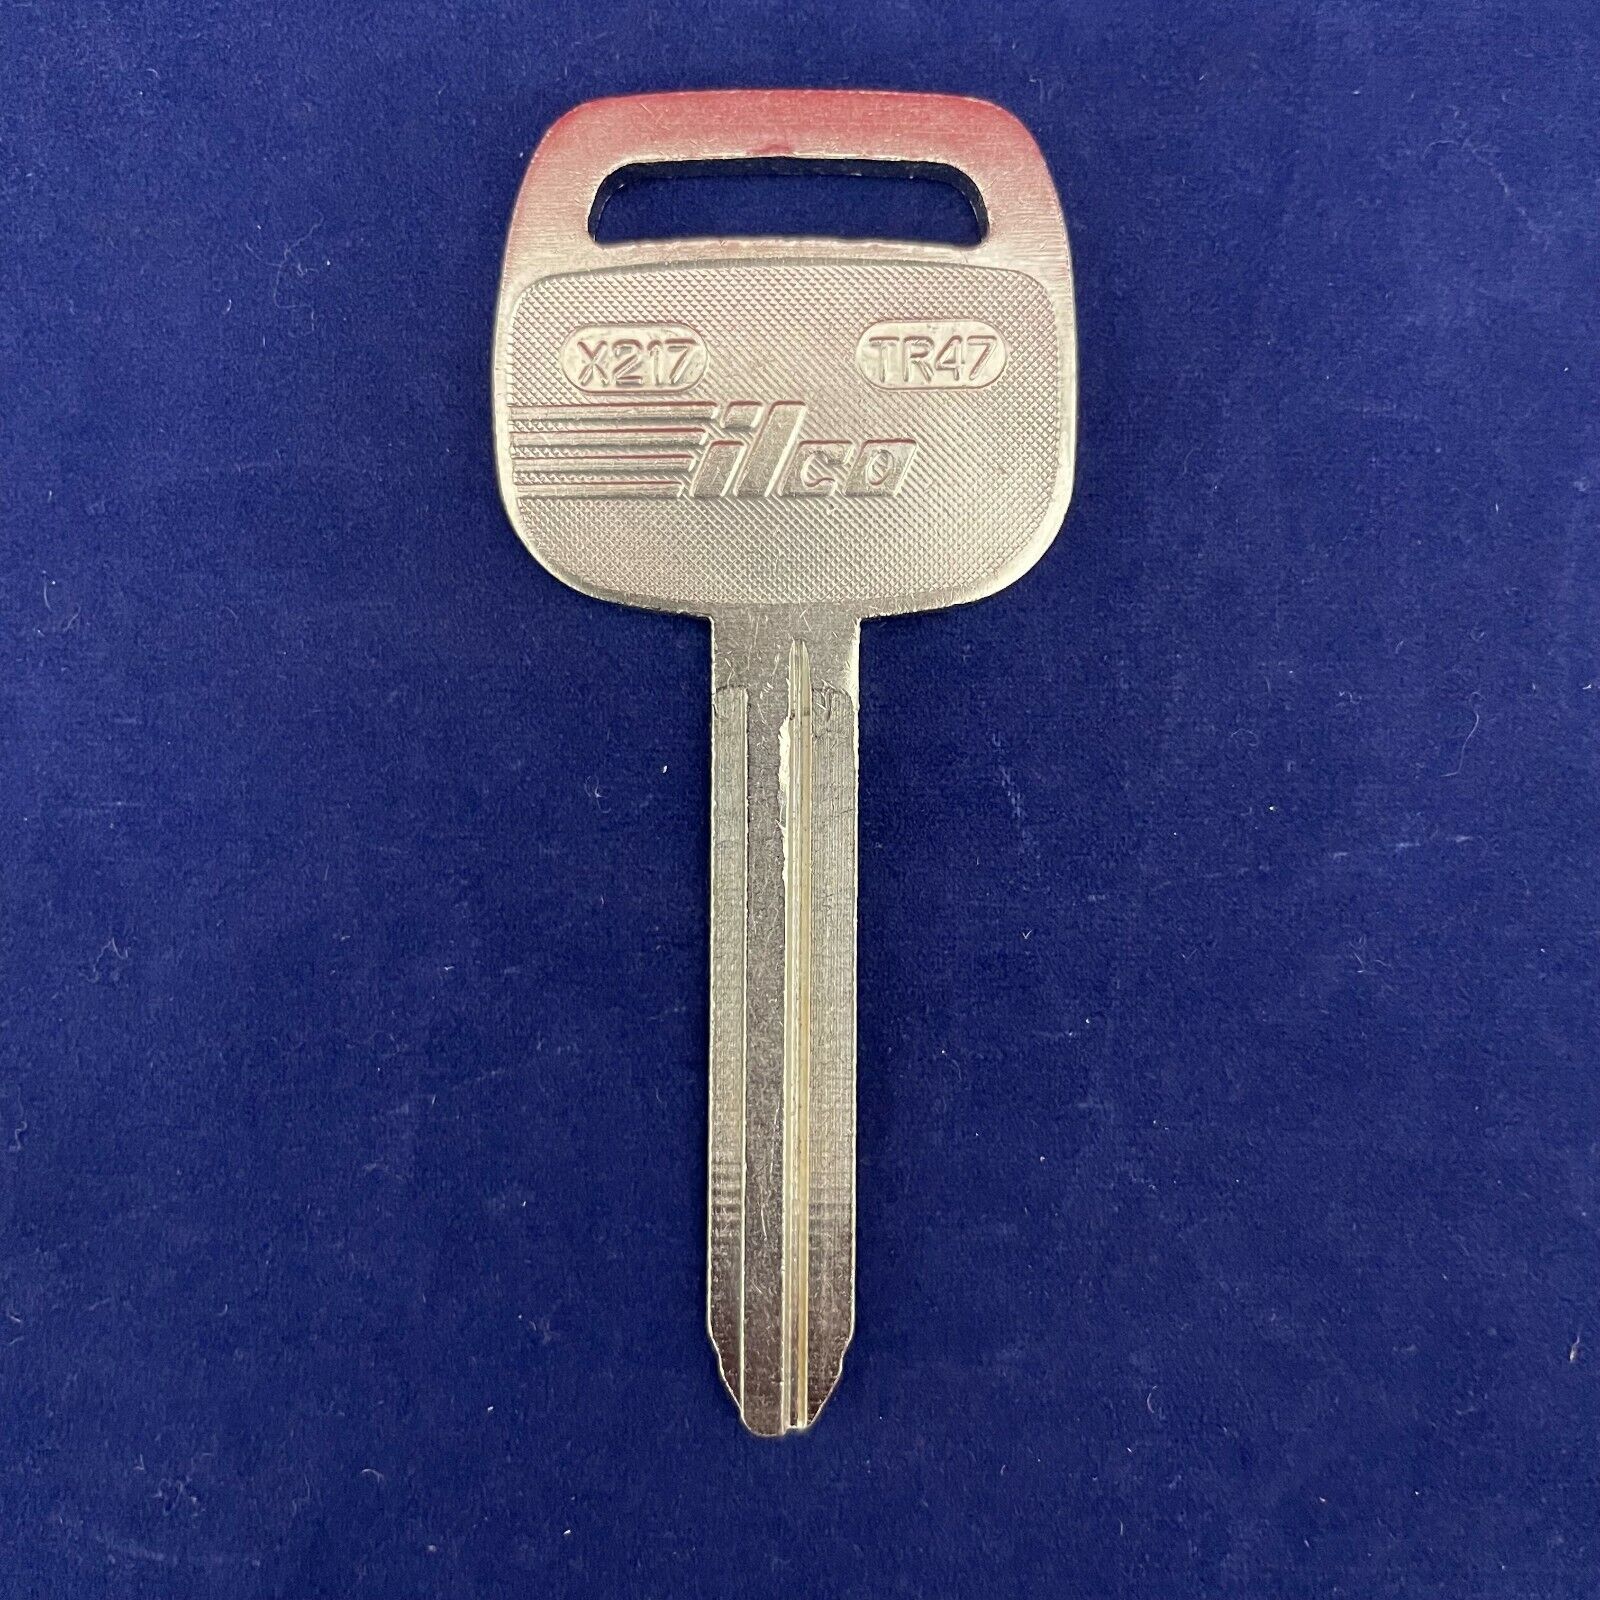 New ILCO X217 TR47 Uncut Key Blank For Toyota 90999-00186 MADE IN MEXICO